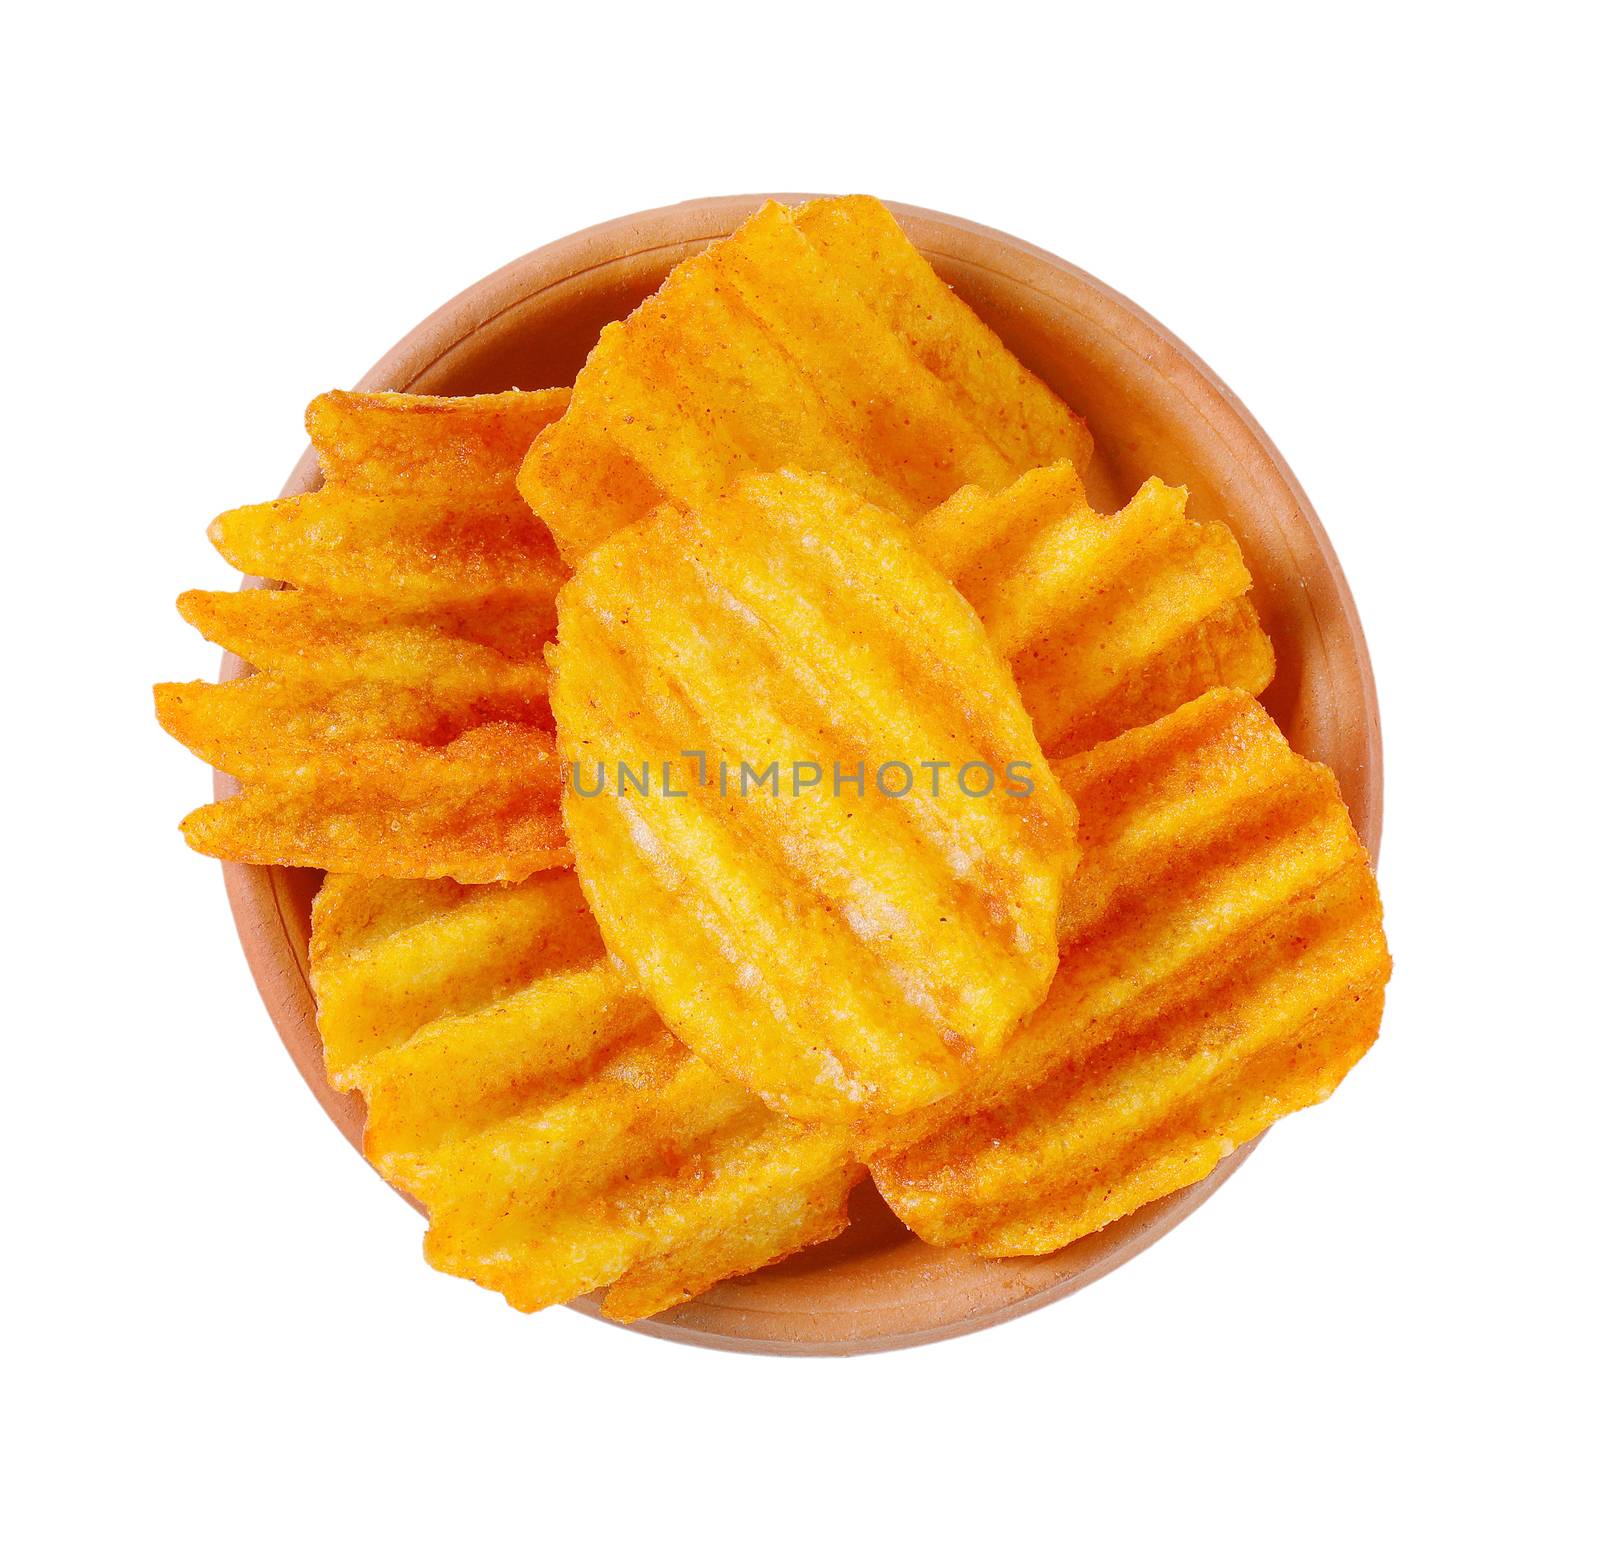 bowl of fried potato chips on white background